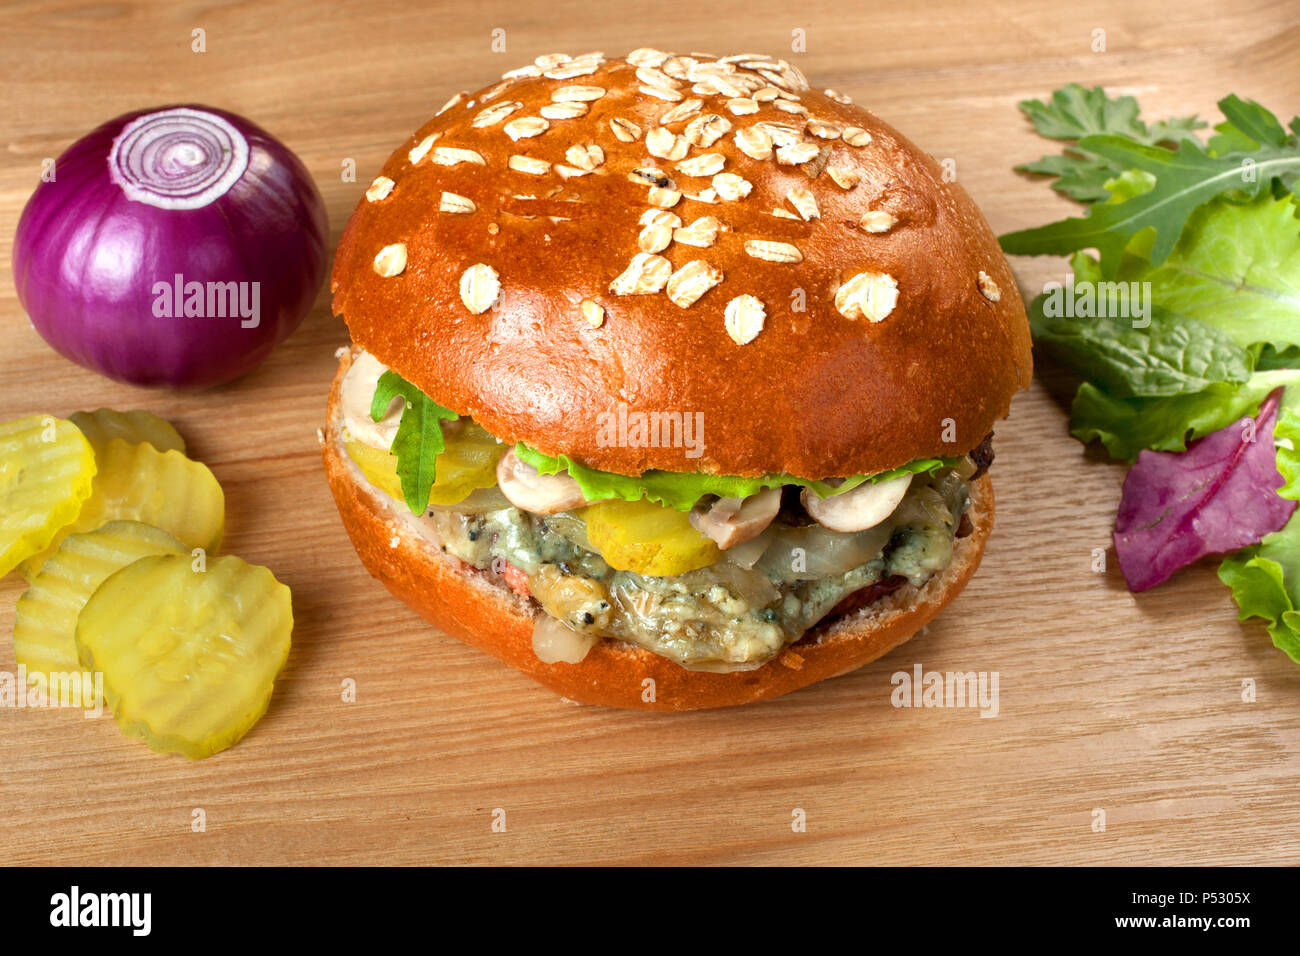 homemade hamburger with blue cheese sauce on a wooden table Stock Photo